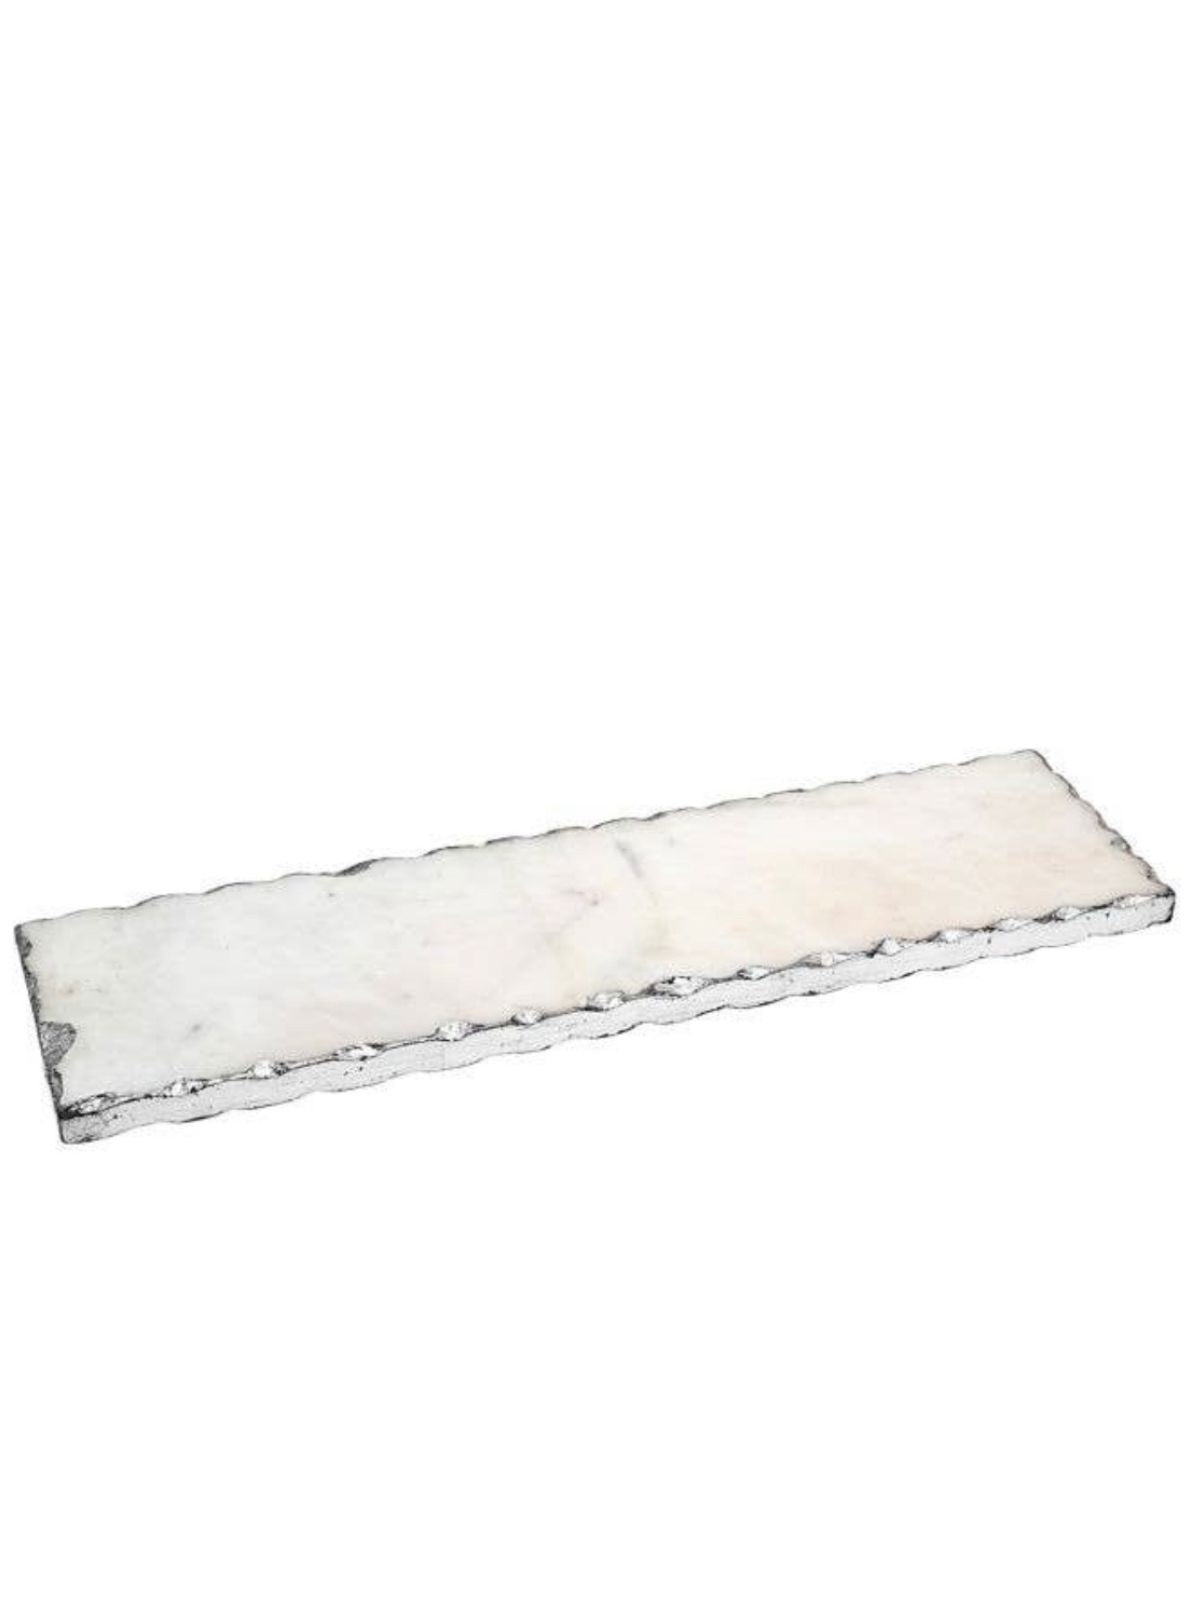 18L x 5W Oblong Marble Decorative Tray with Silver Metallic Edge. 